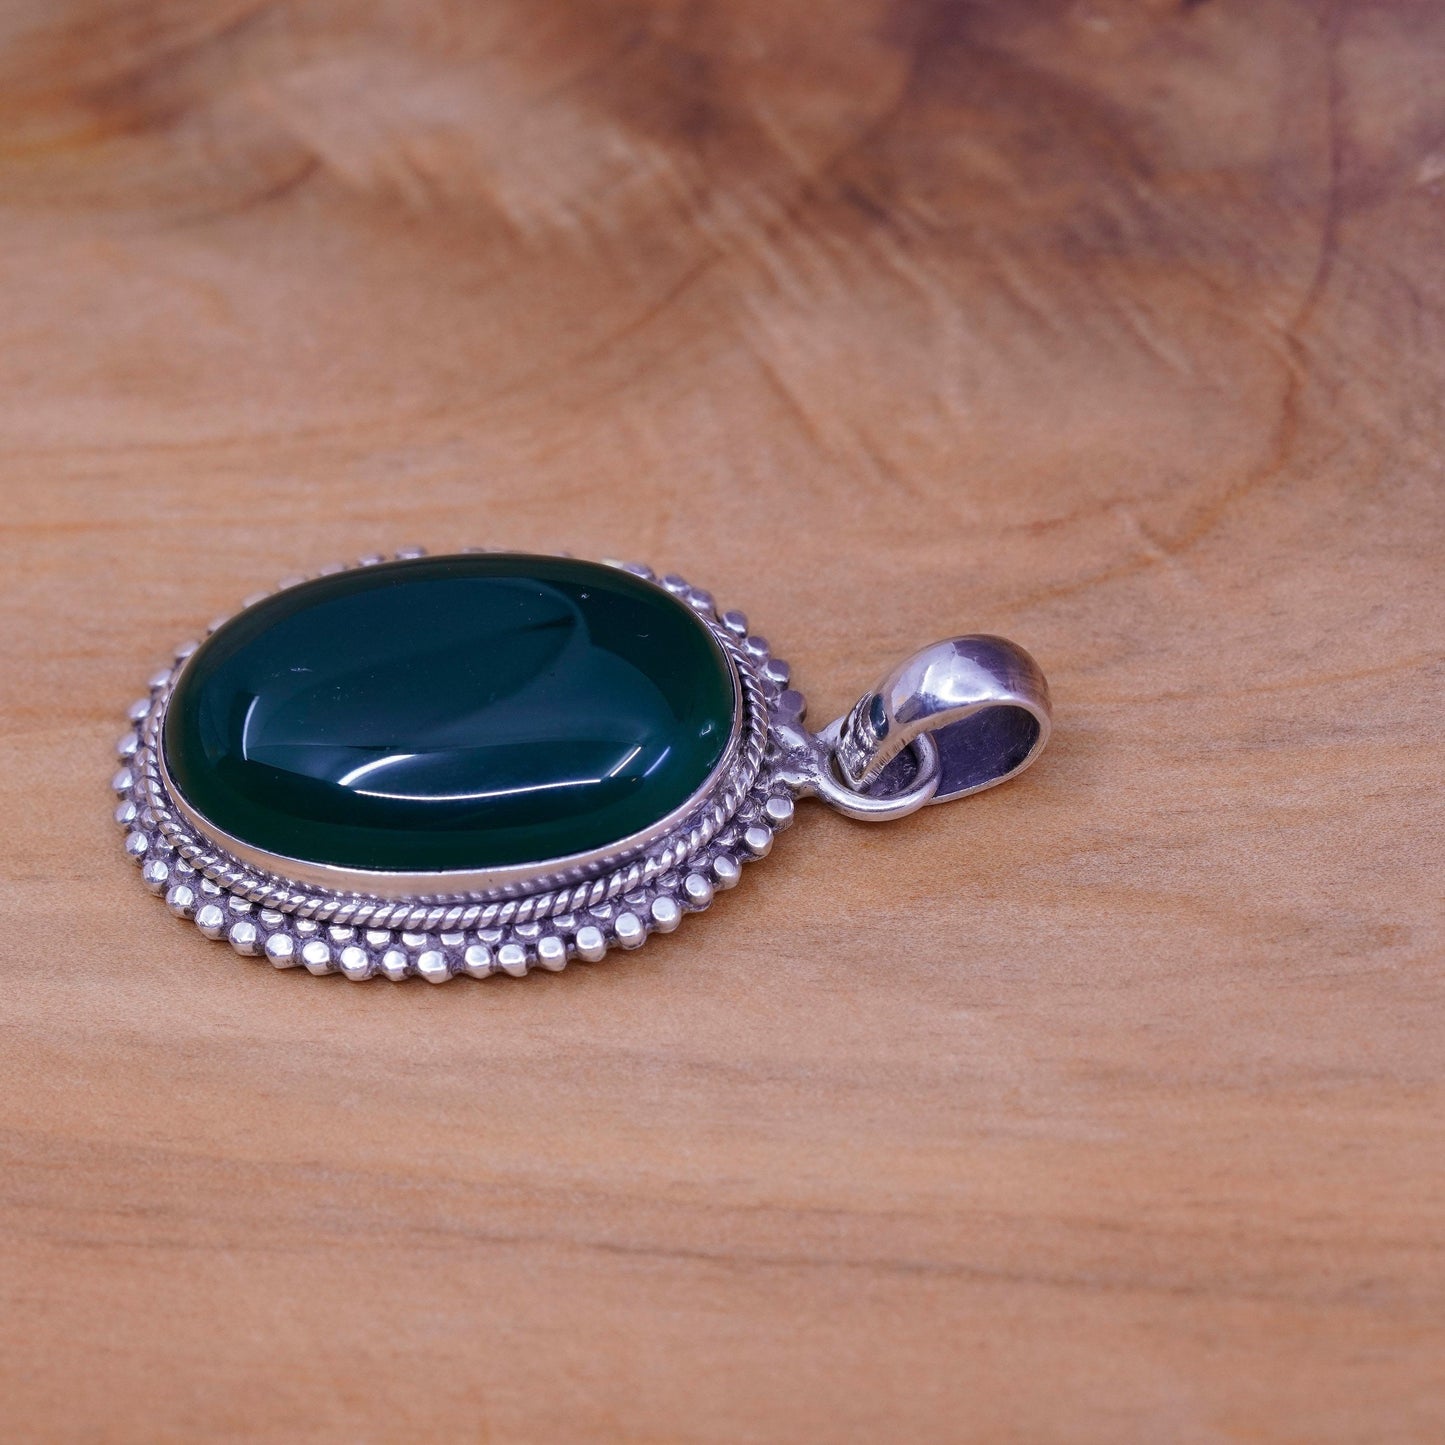 Vintage Sterling 925 silver handmade pendant with oval emerald and bead